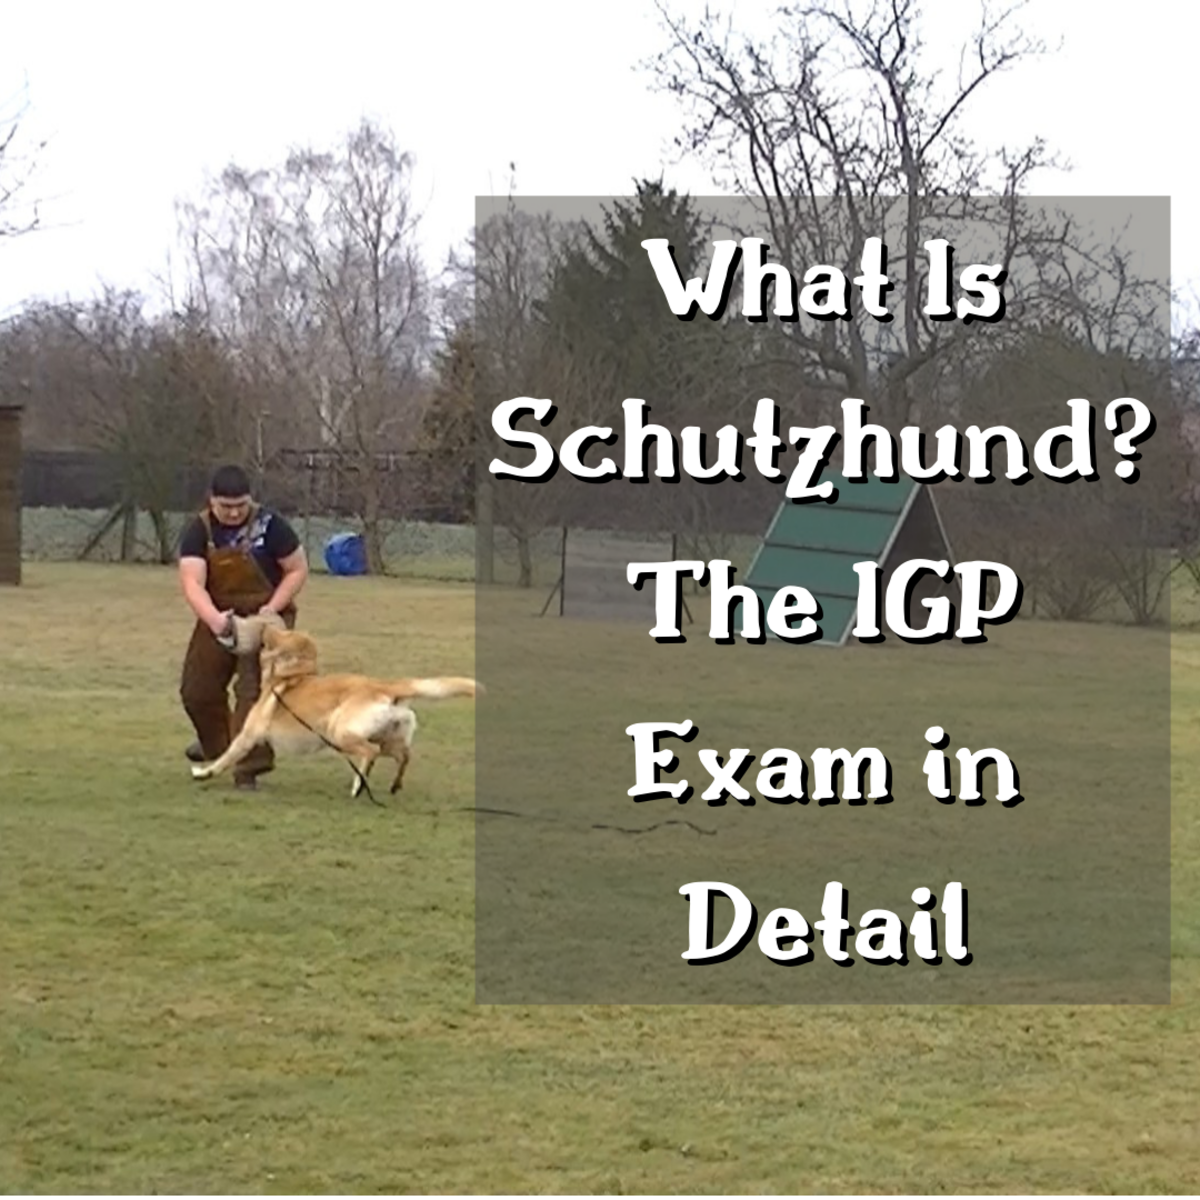 Read on to learn all about Schutzhund and the IGP exam. You'll learn the basics and the reasoning behind the main tests. You'll also find a helpful video with more info.